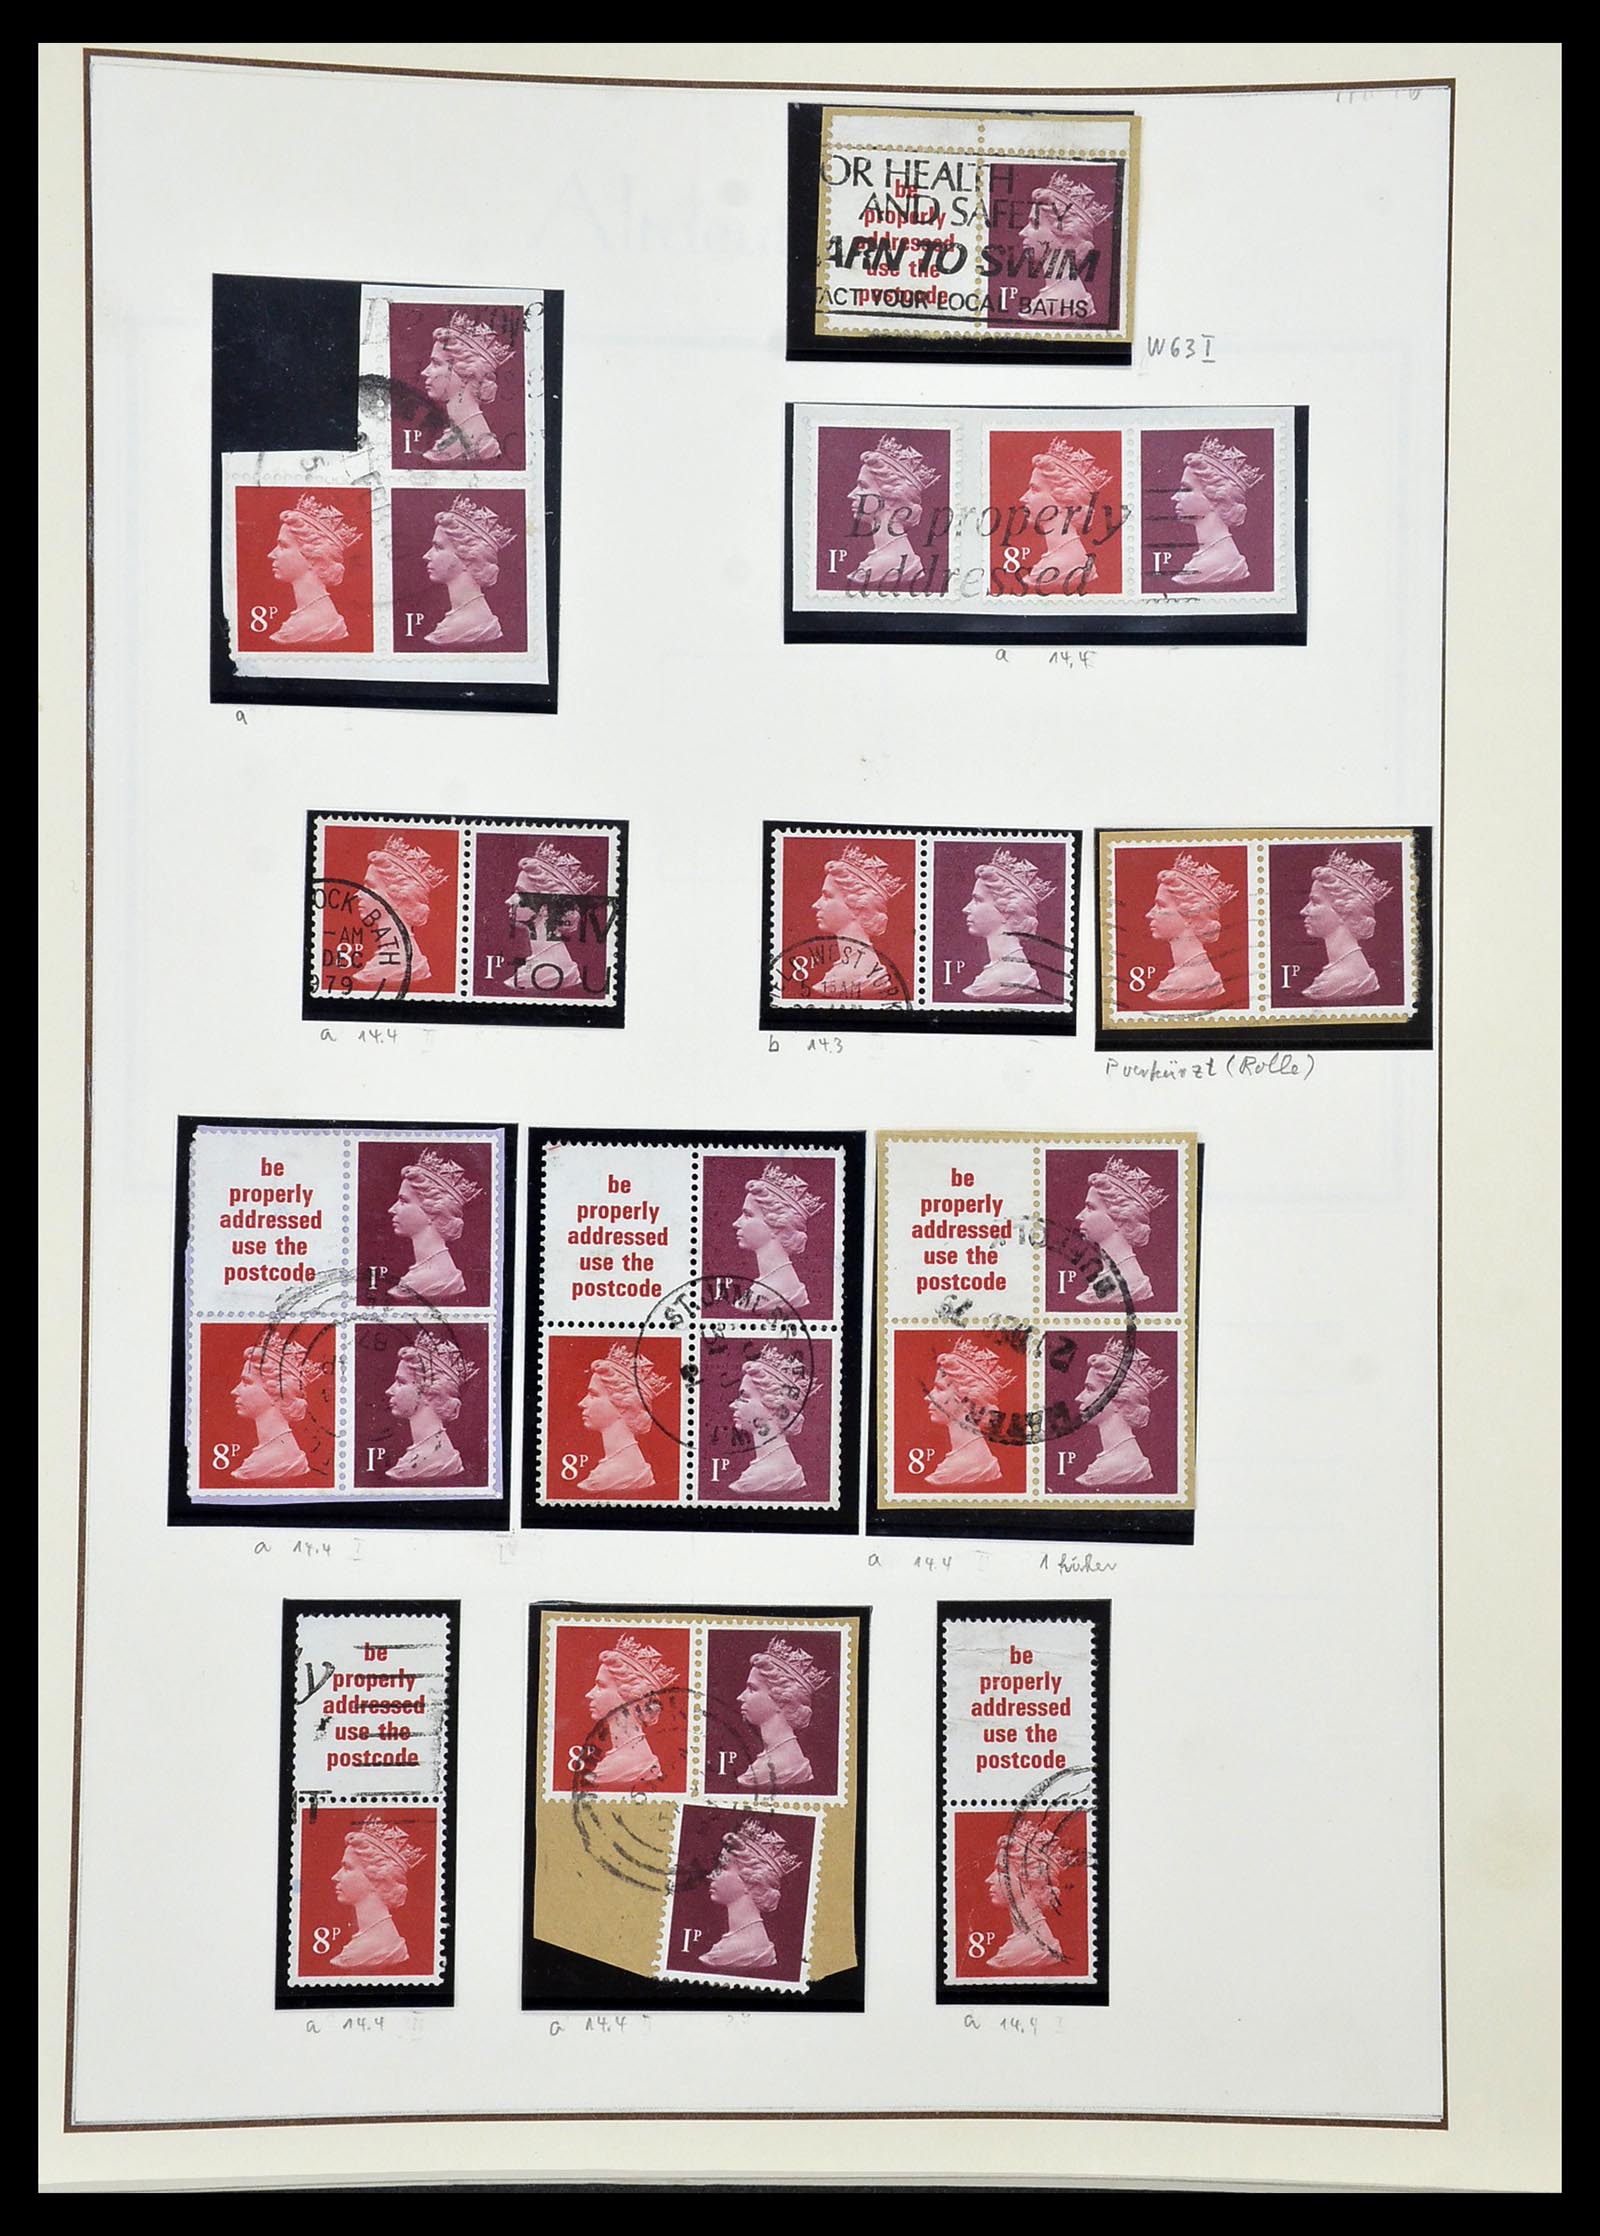 34221 198 - Stamp collection 34221 Great Britain Machins/castles 1971-2005.